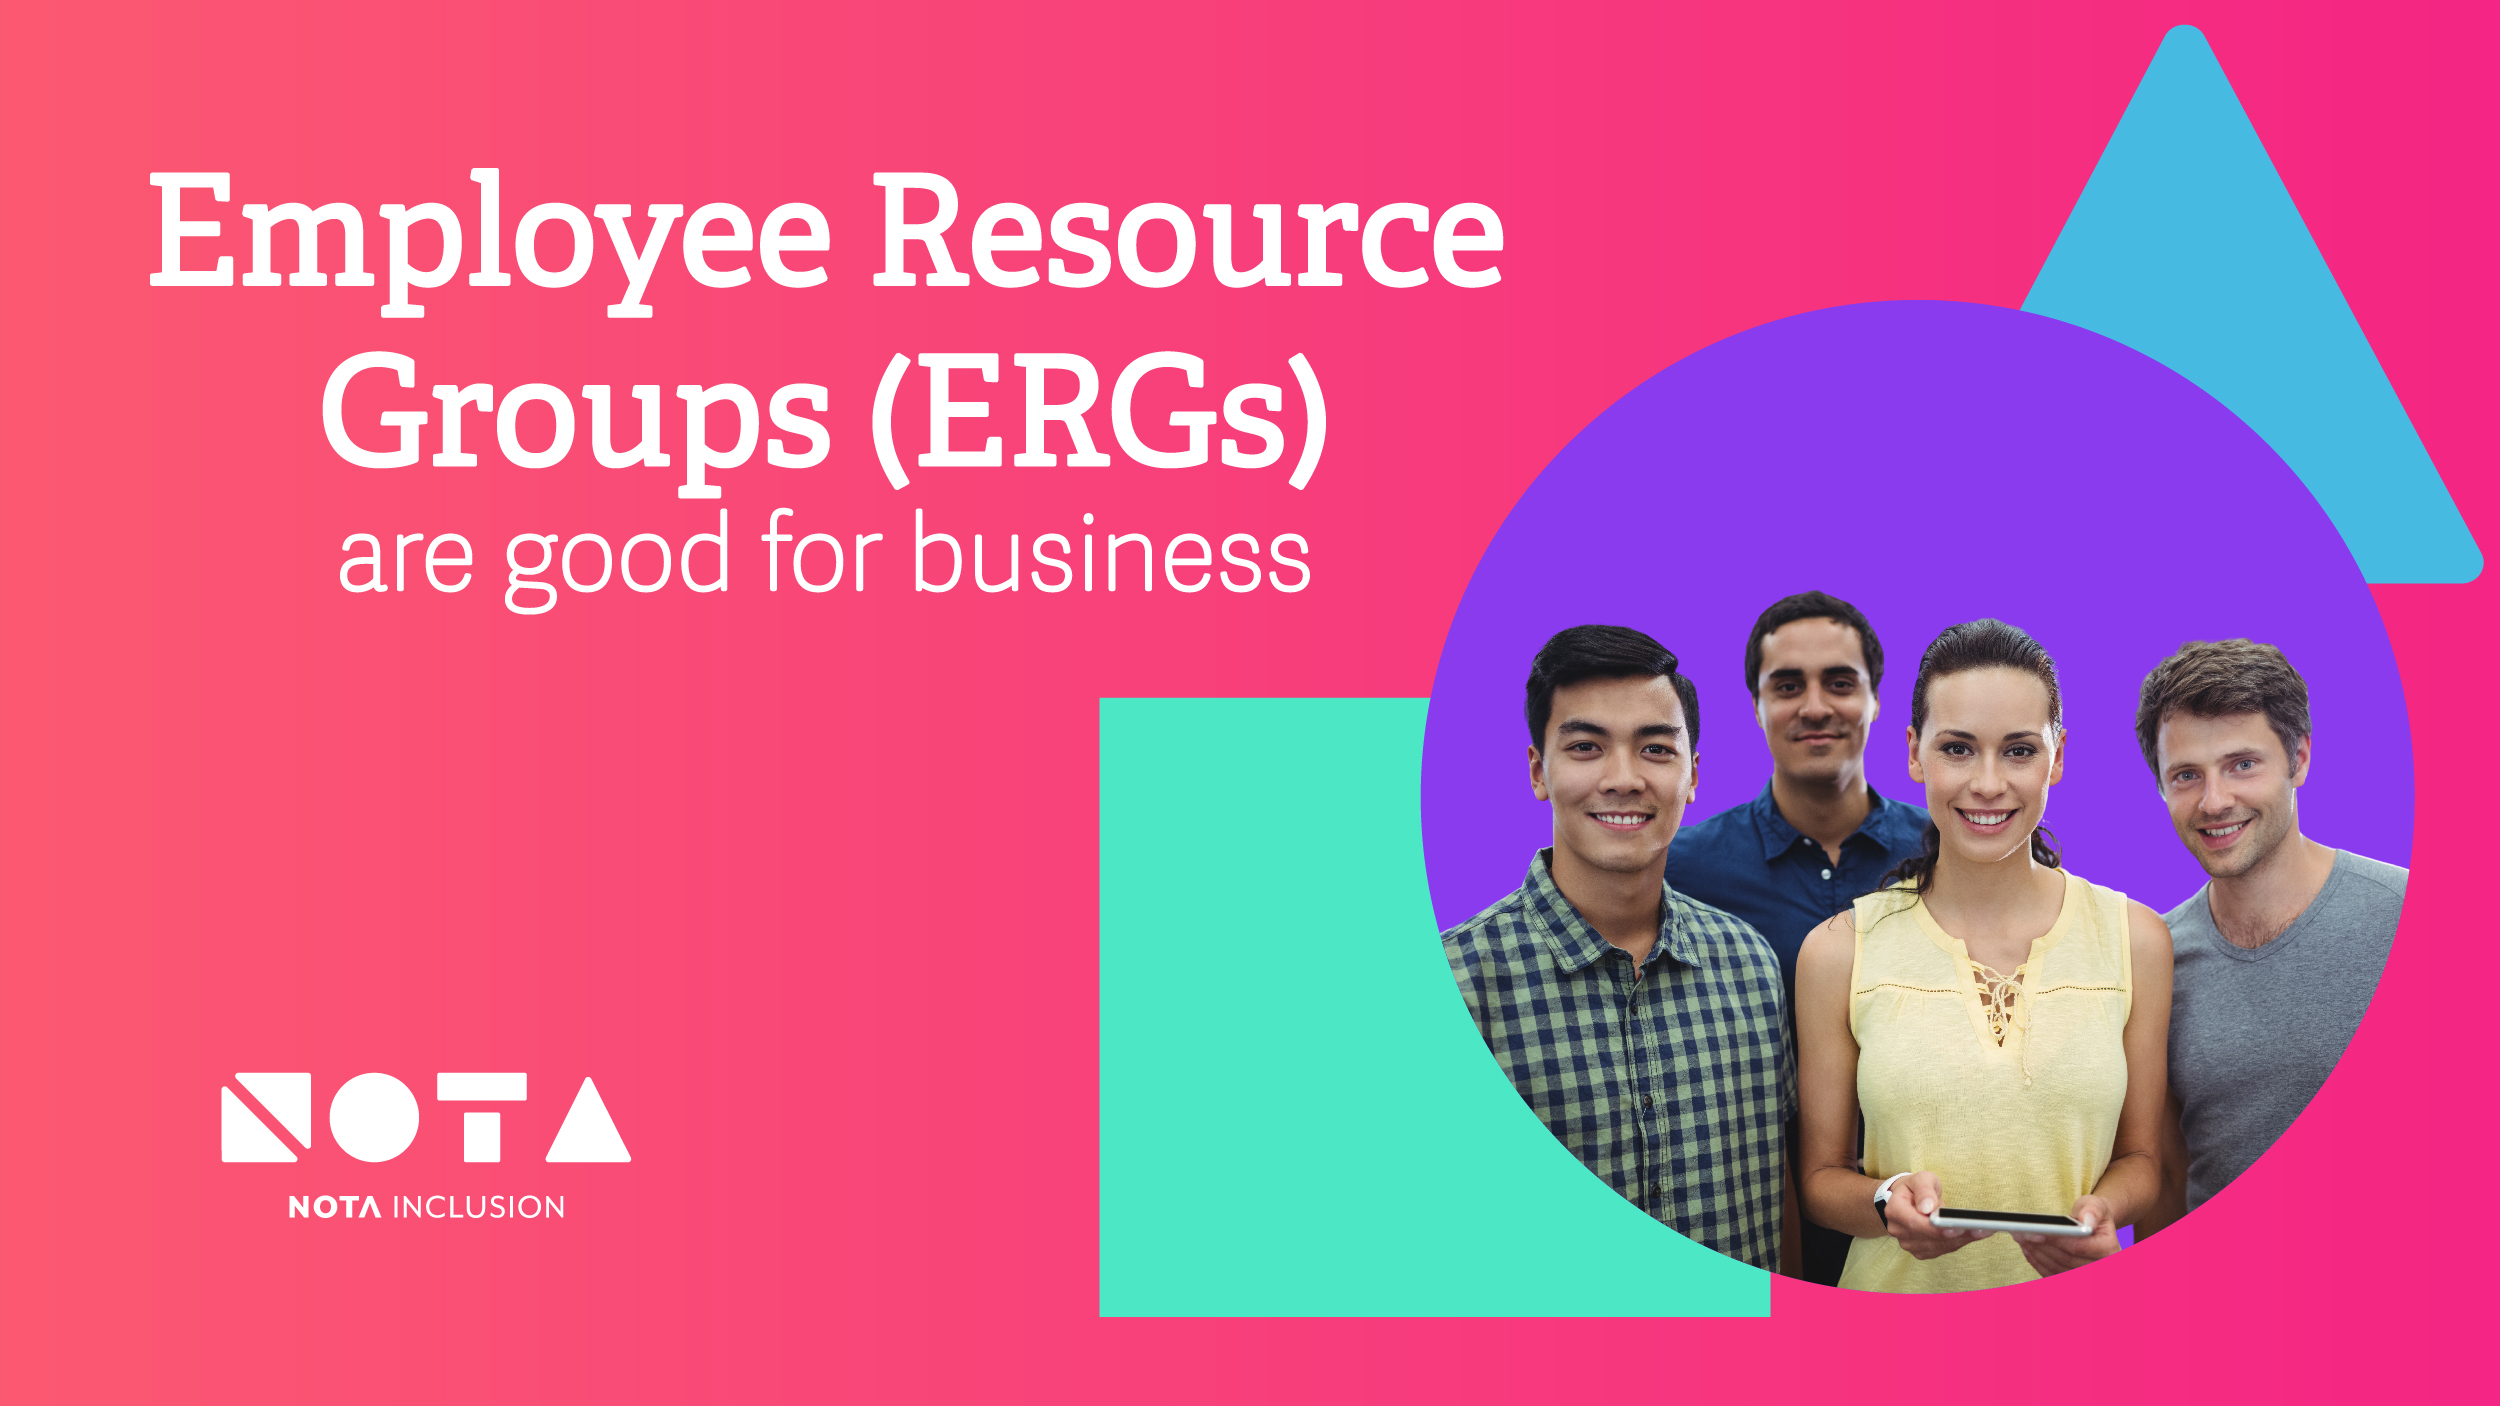 Employee Resource Groups (ERGs) are good for business